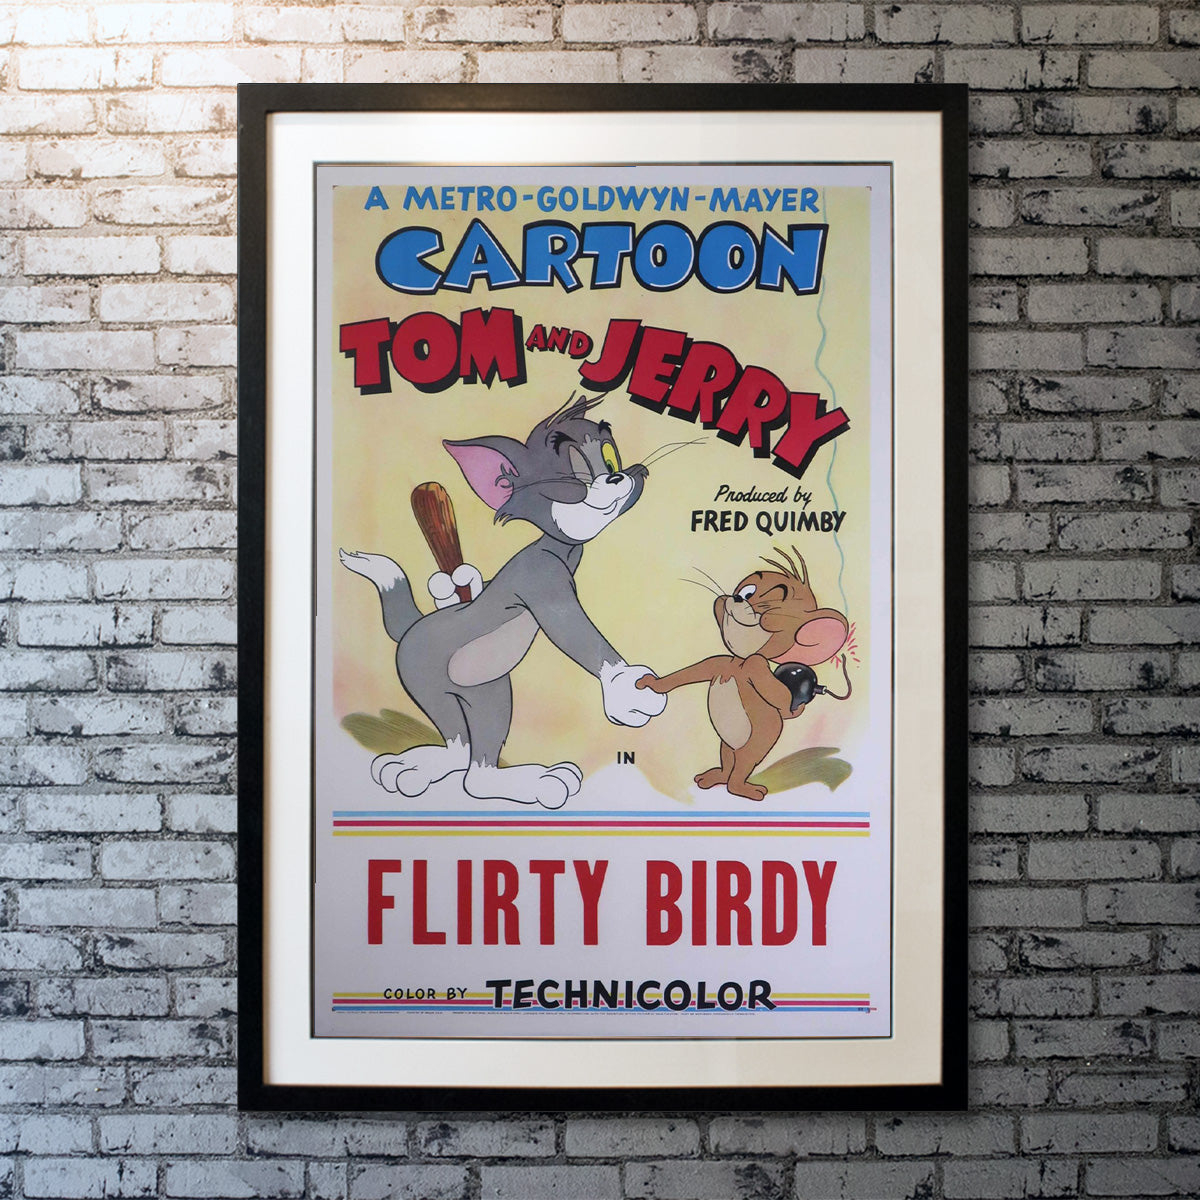 Tom And Jerry In Flirty Birdy (1950s)